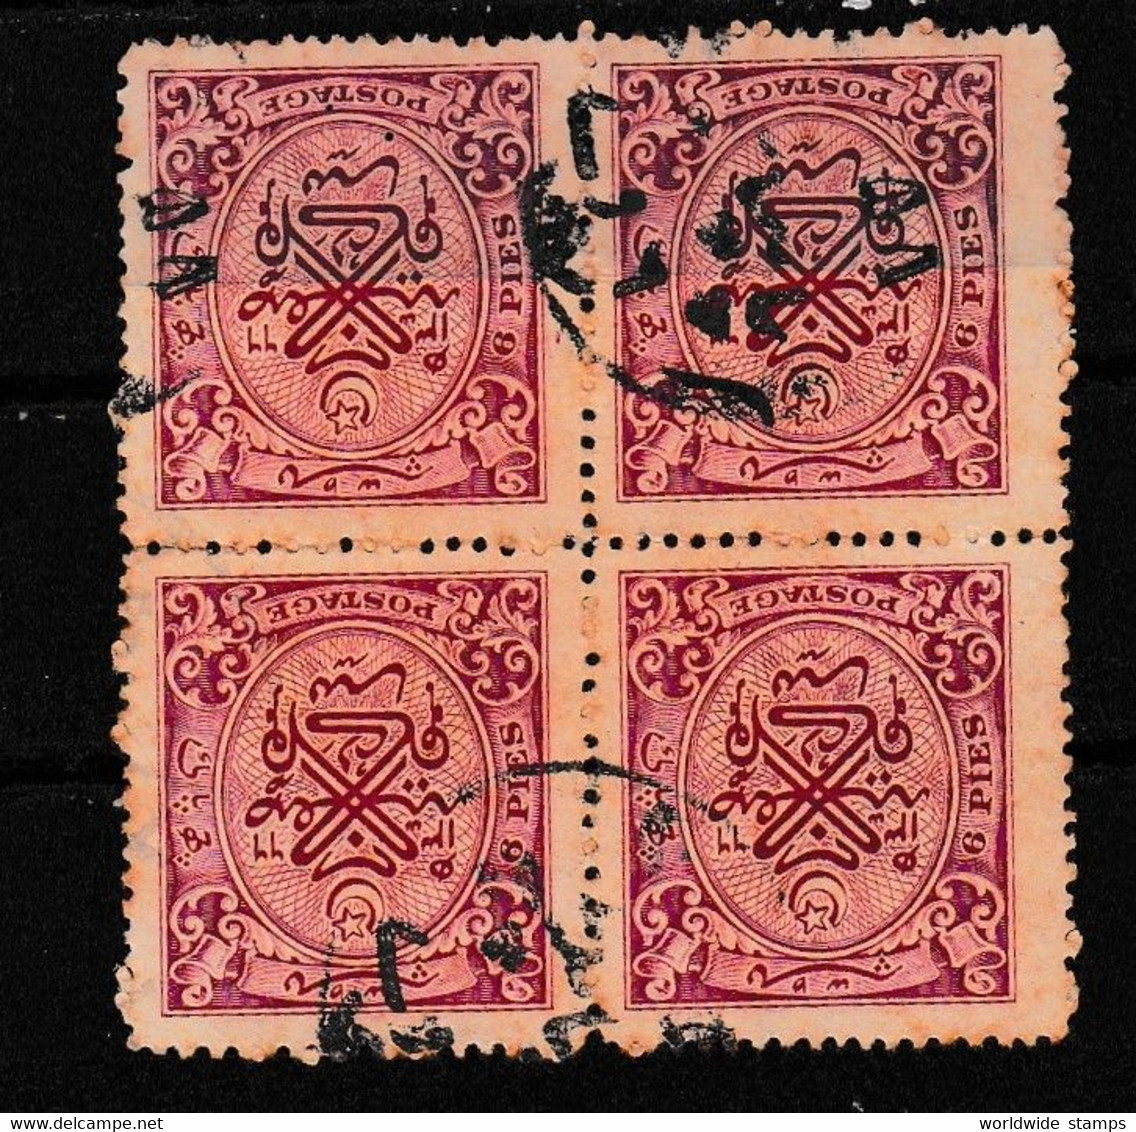 INDIA STATE HYDERABAD 1948 6p Block Of 4  SG59 Very FINE USED. - Hyderabad